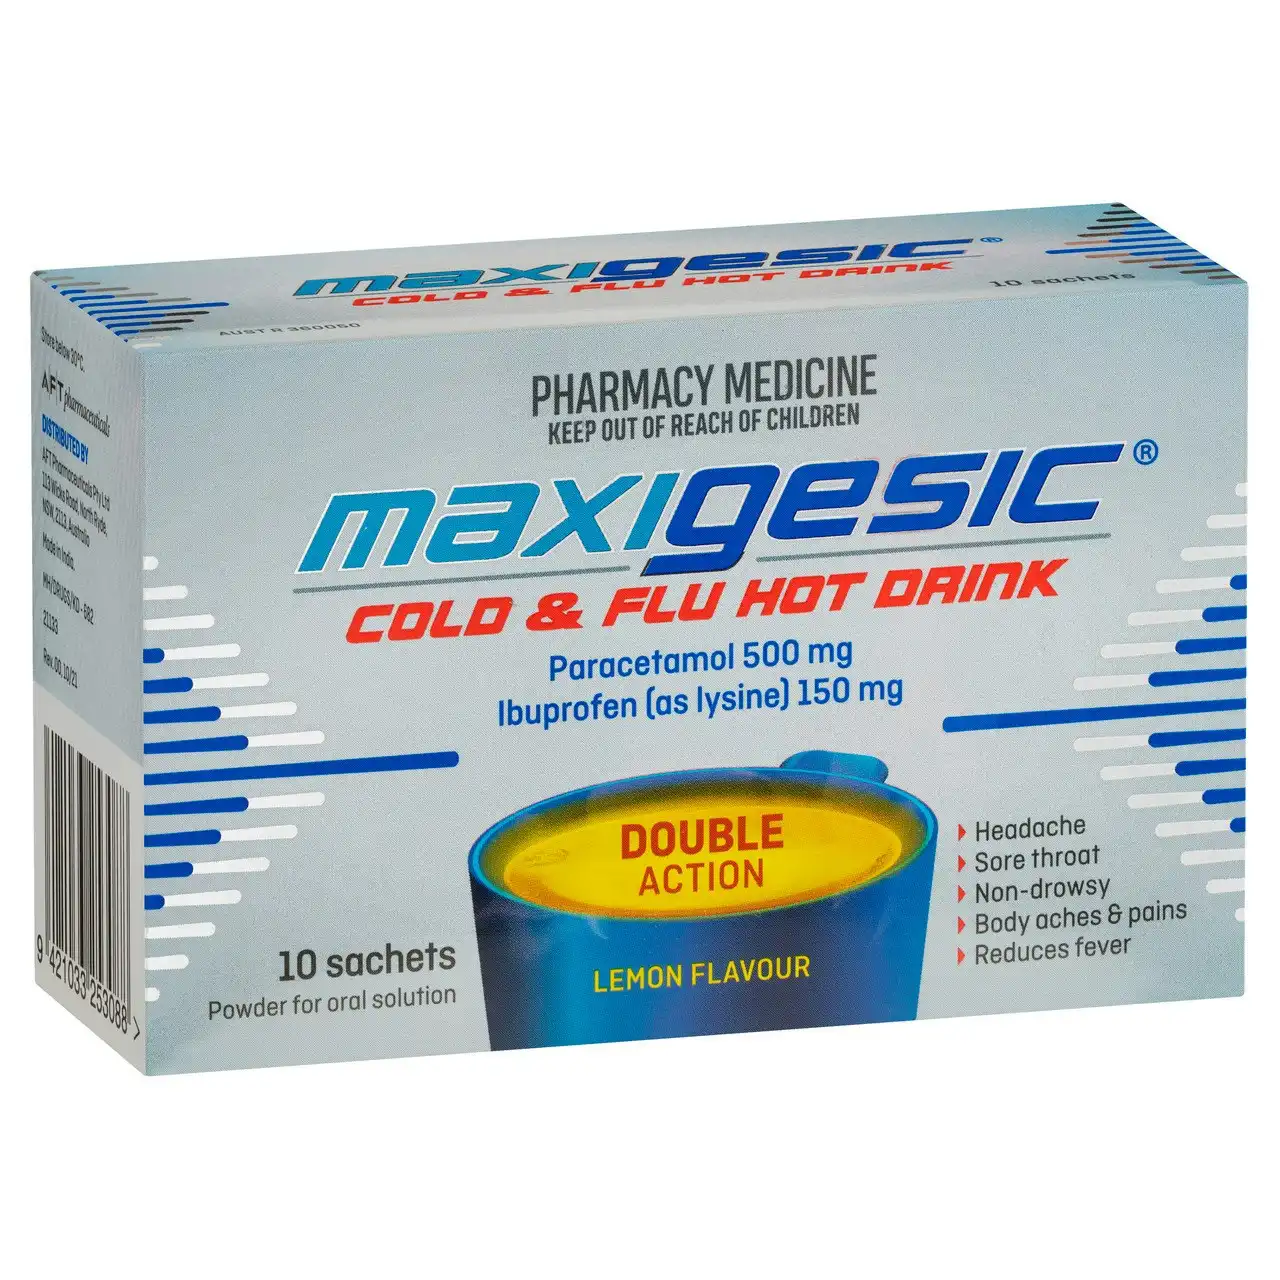 MAXIGESIC(R) Cold & Flu Hot Drink 10 Pack